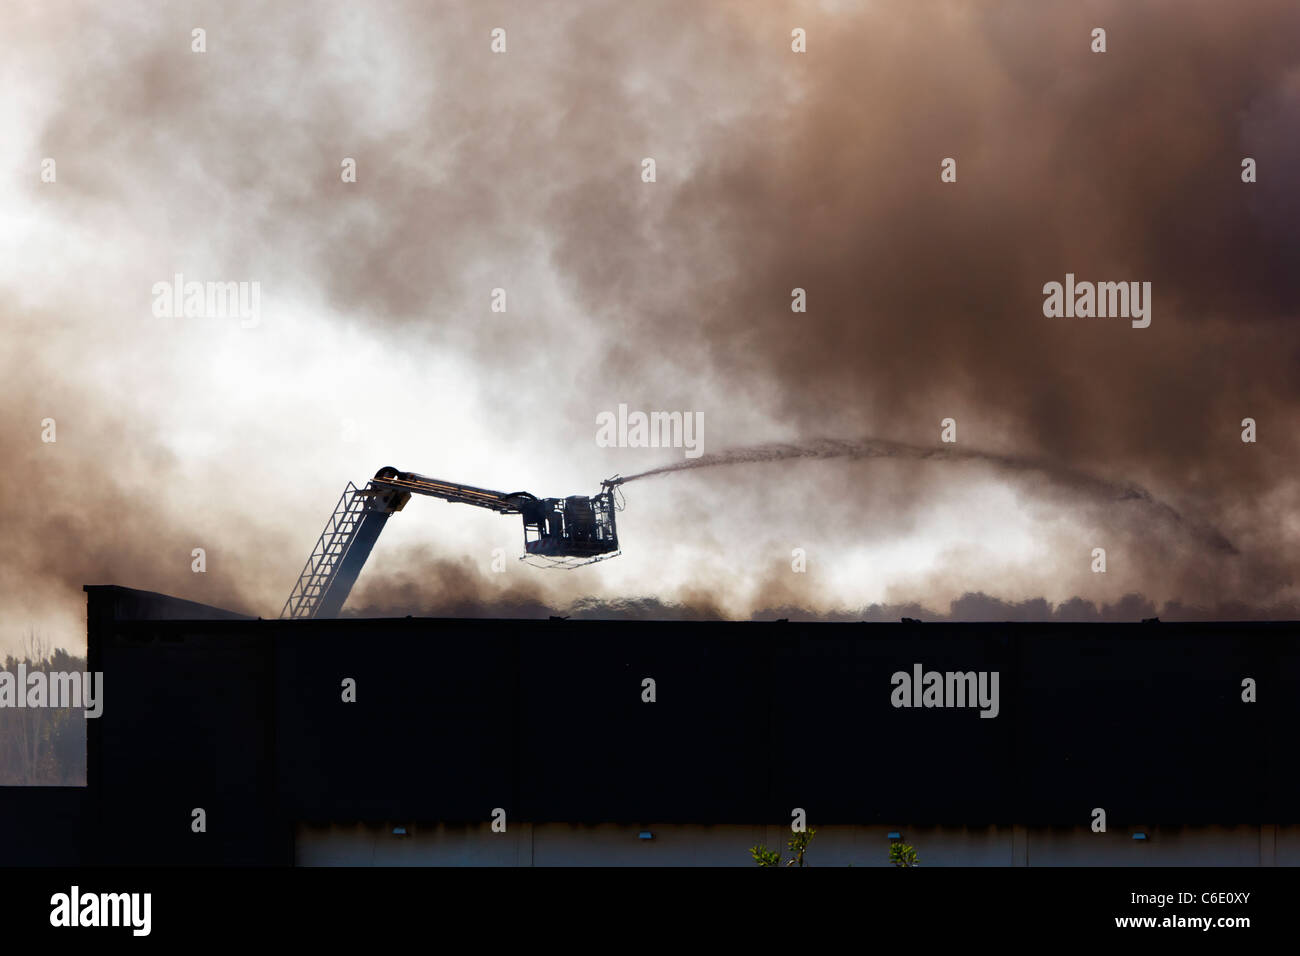 Fighting fire with remote controlled hose on ladder. Stock Photo